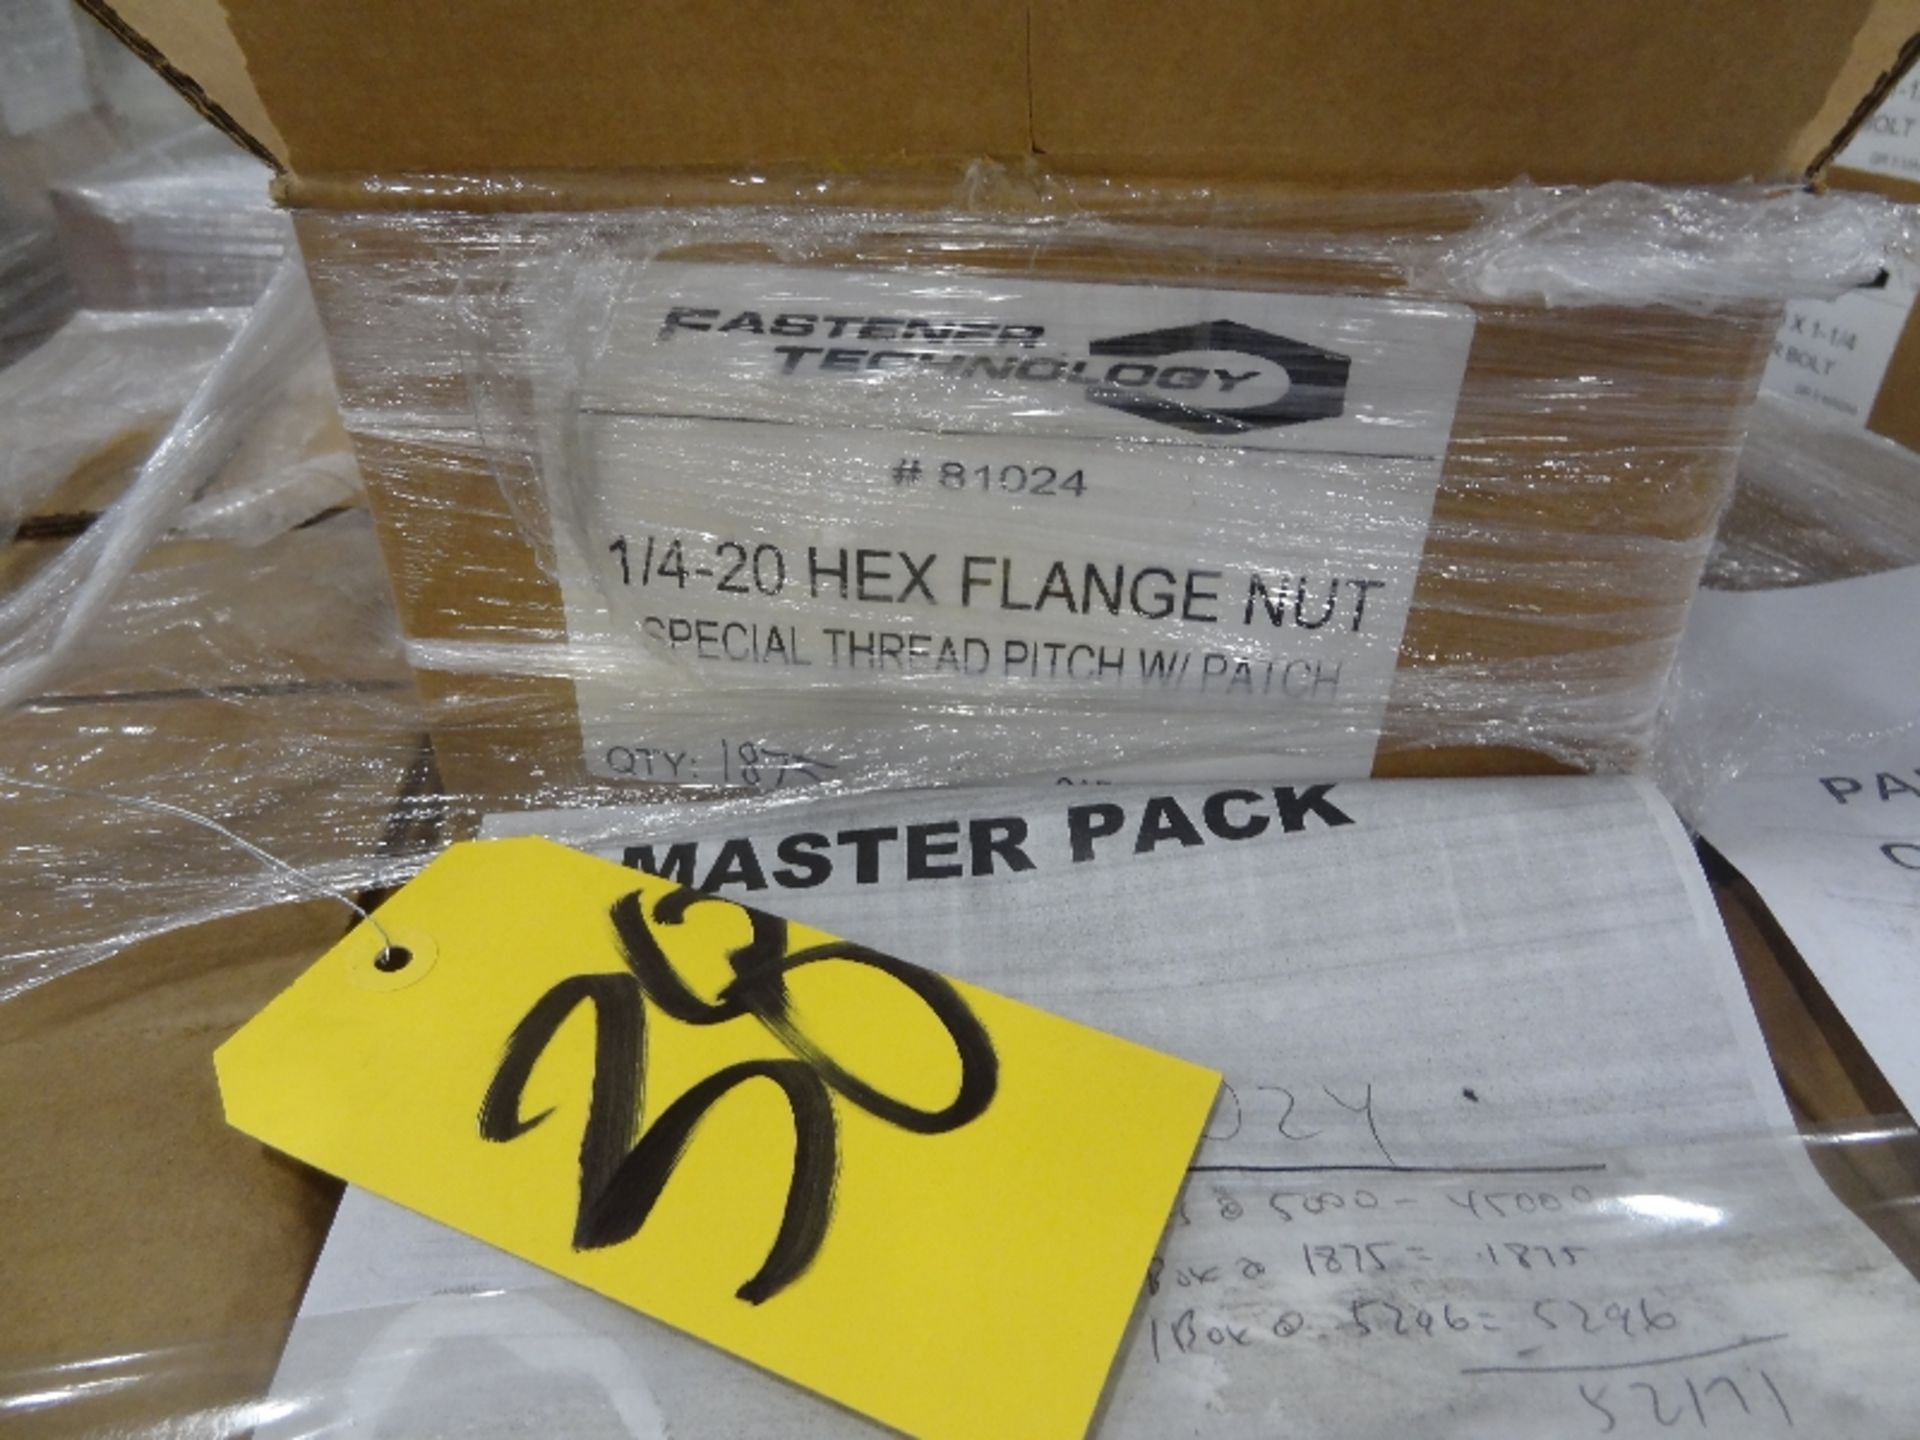 Pallet of New Boxes of 1/4-20 Hex Flange Nut, Special Thread Pitch w/Patch - Image 2 of 2